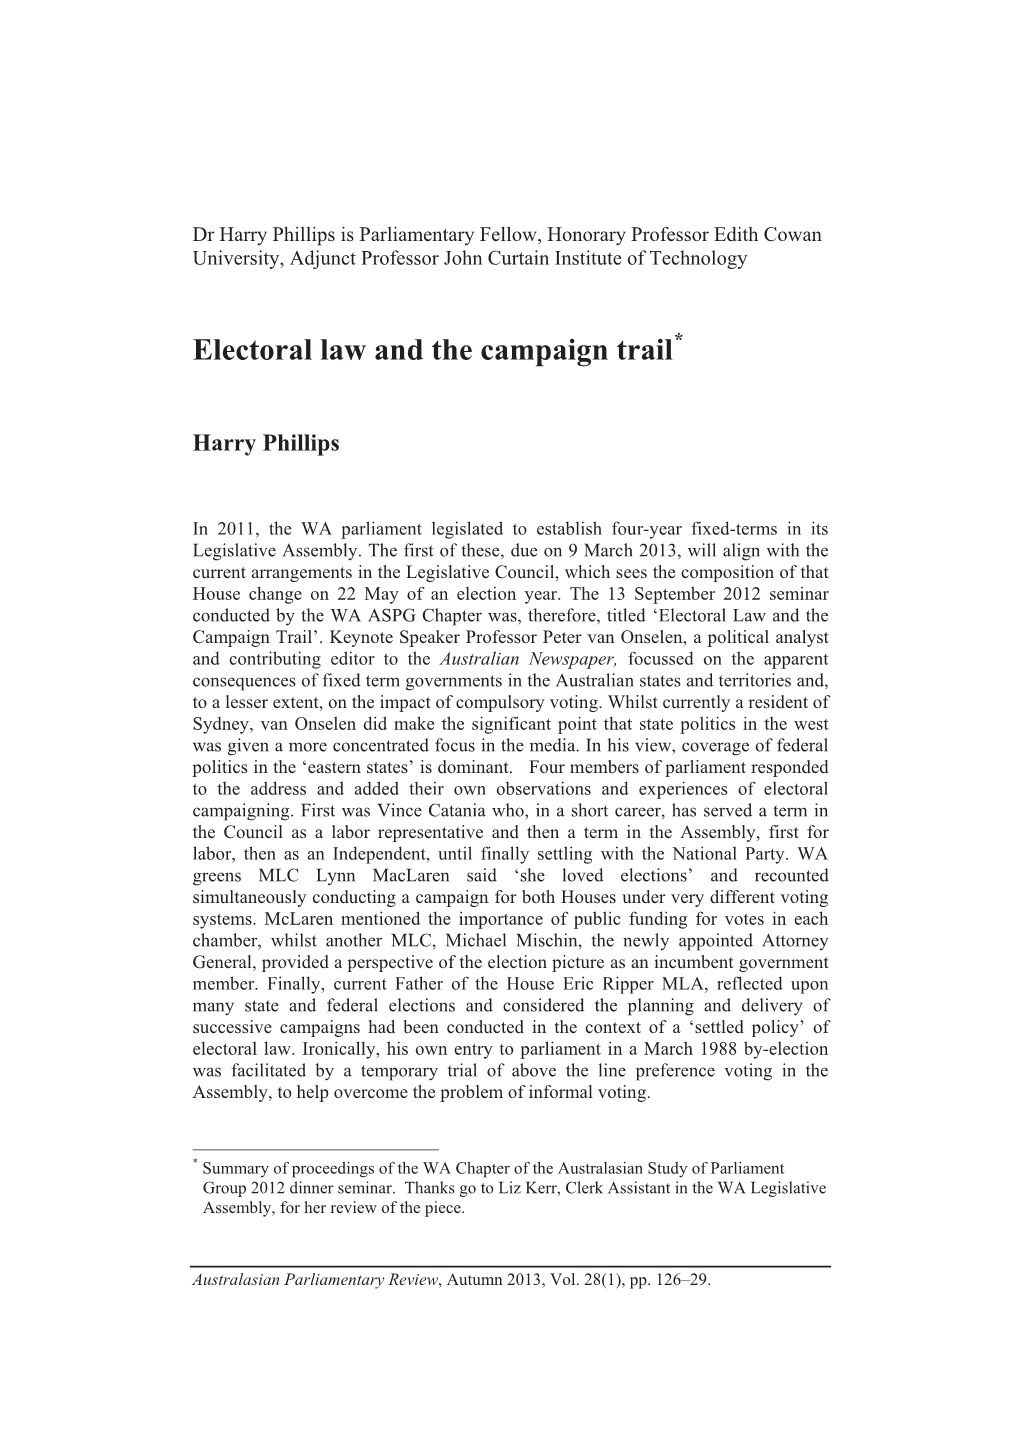 Electoral Law and the Campaign Trail *